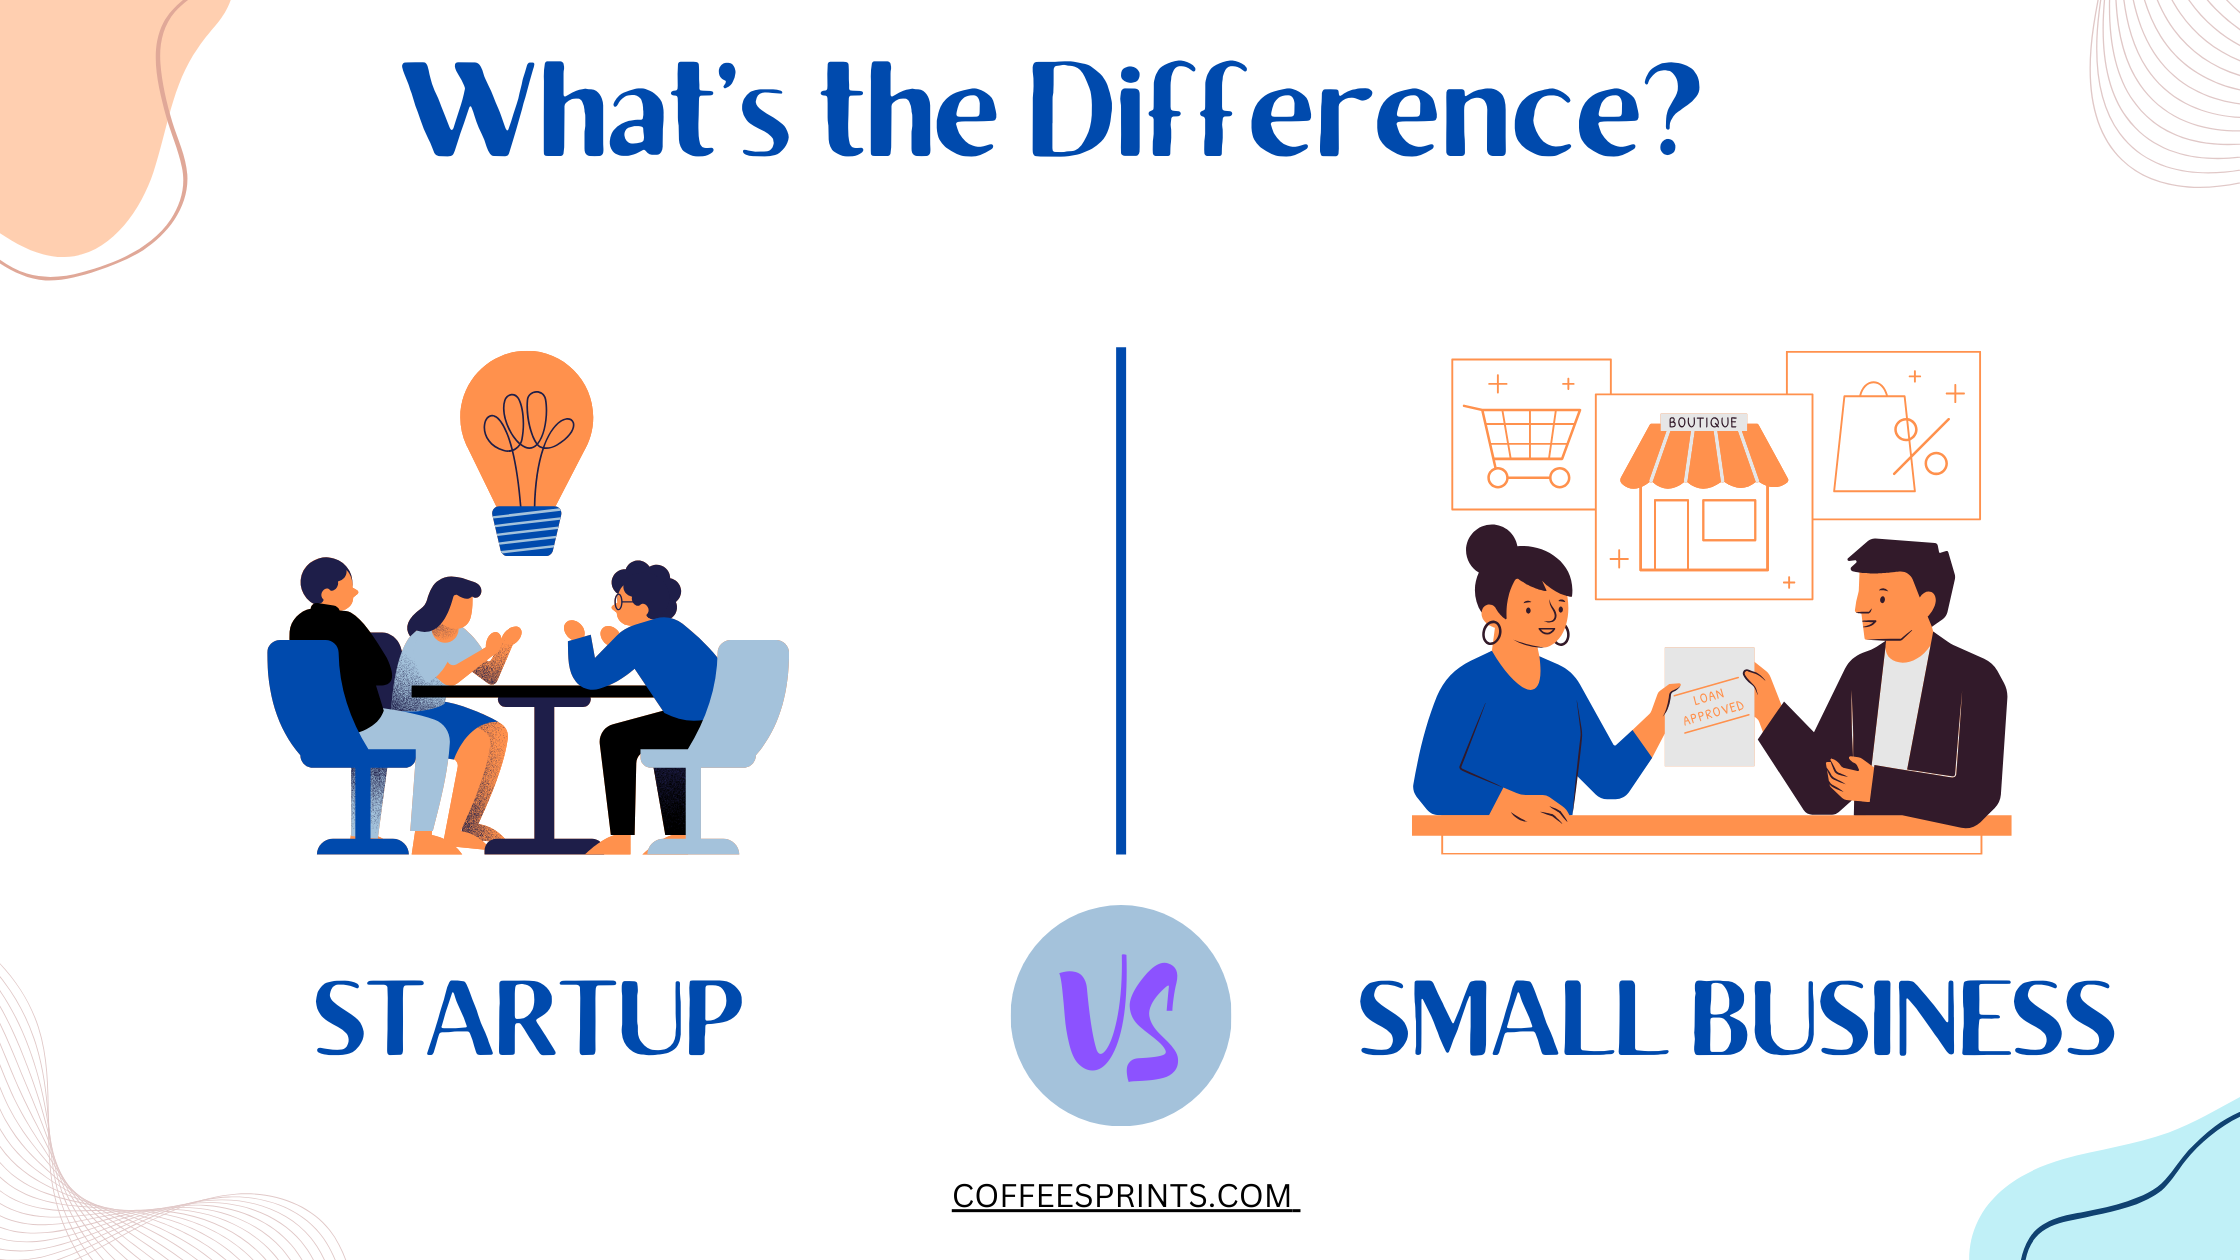 Startup vs Small business differences coffee sprints